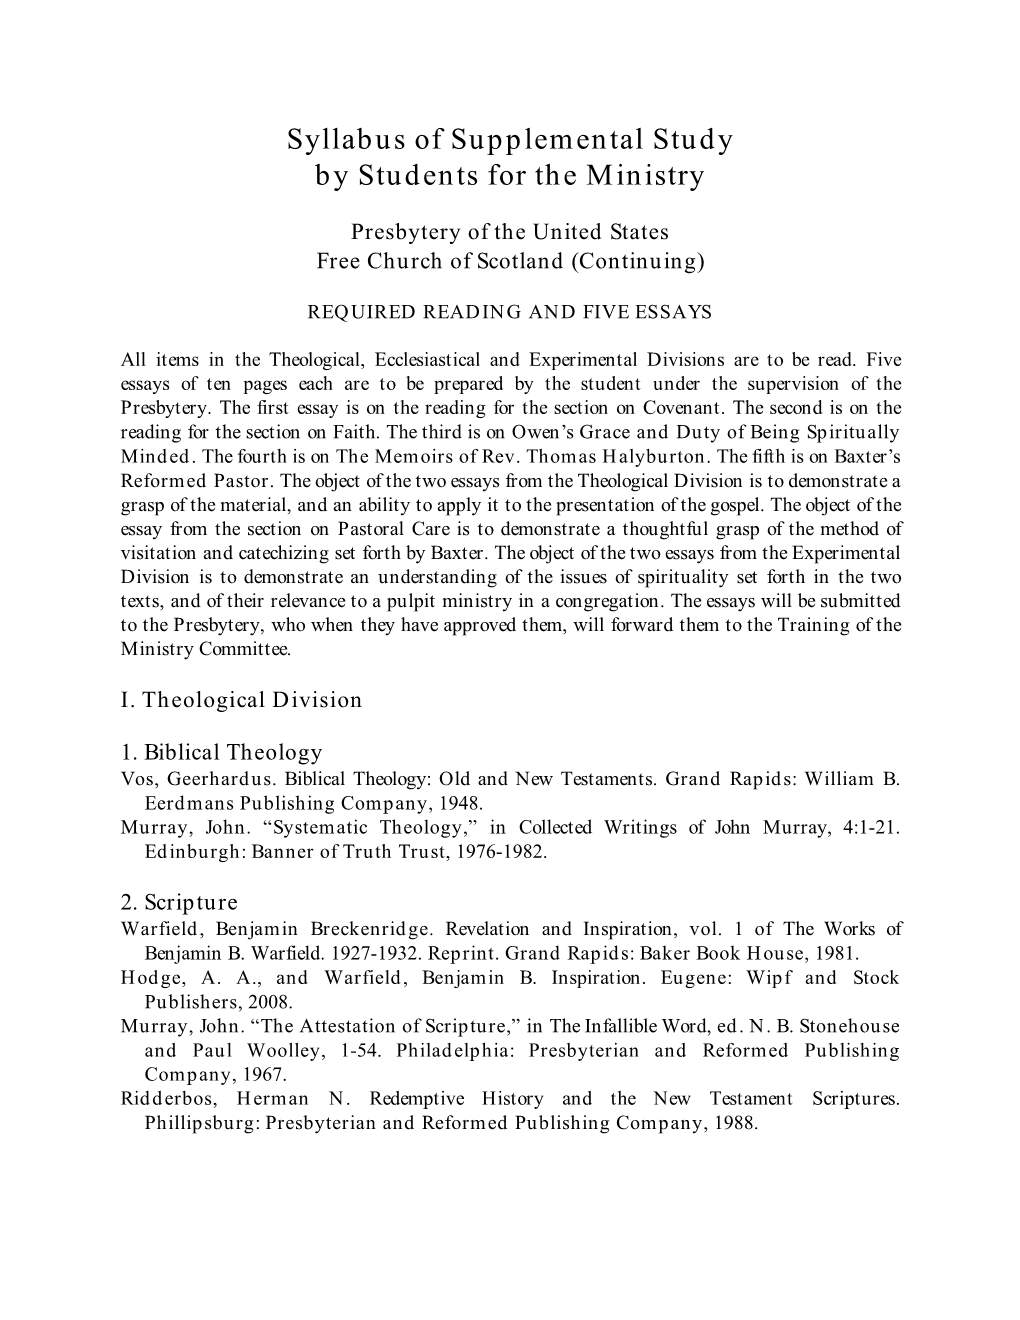 Syllabus of Supplemental Study by Students for the Ministry